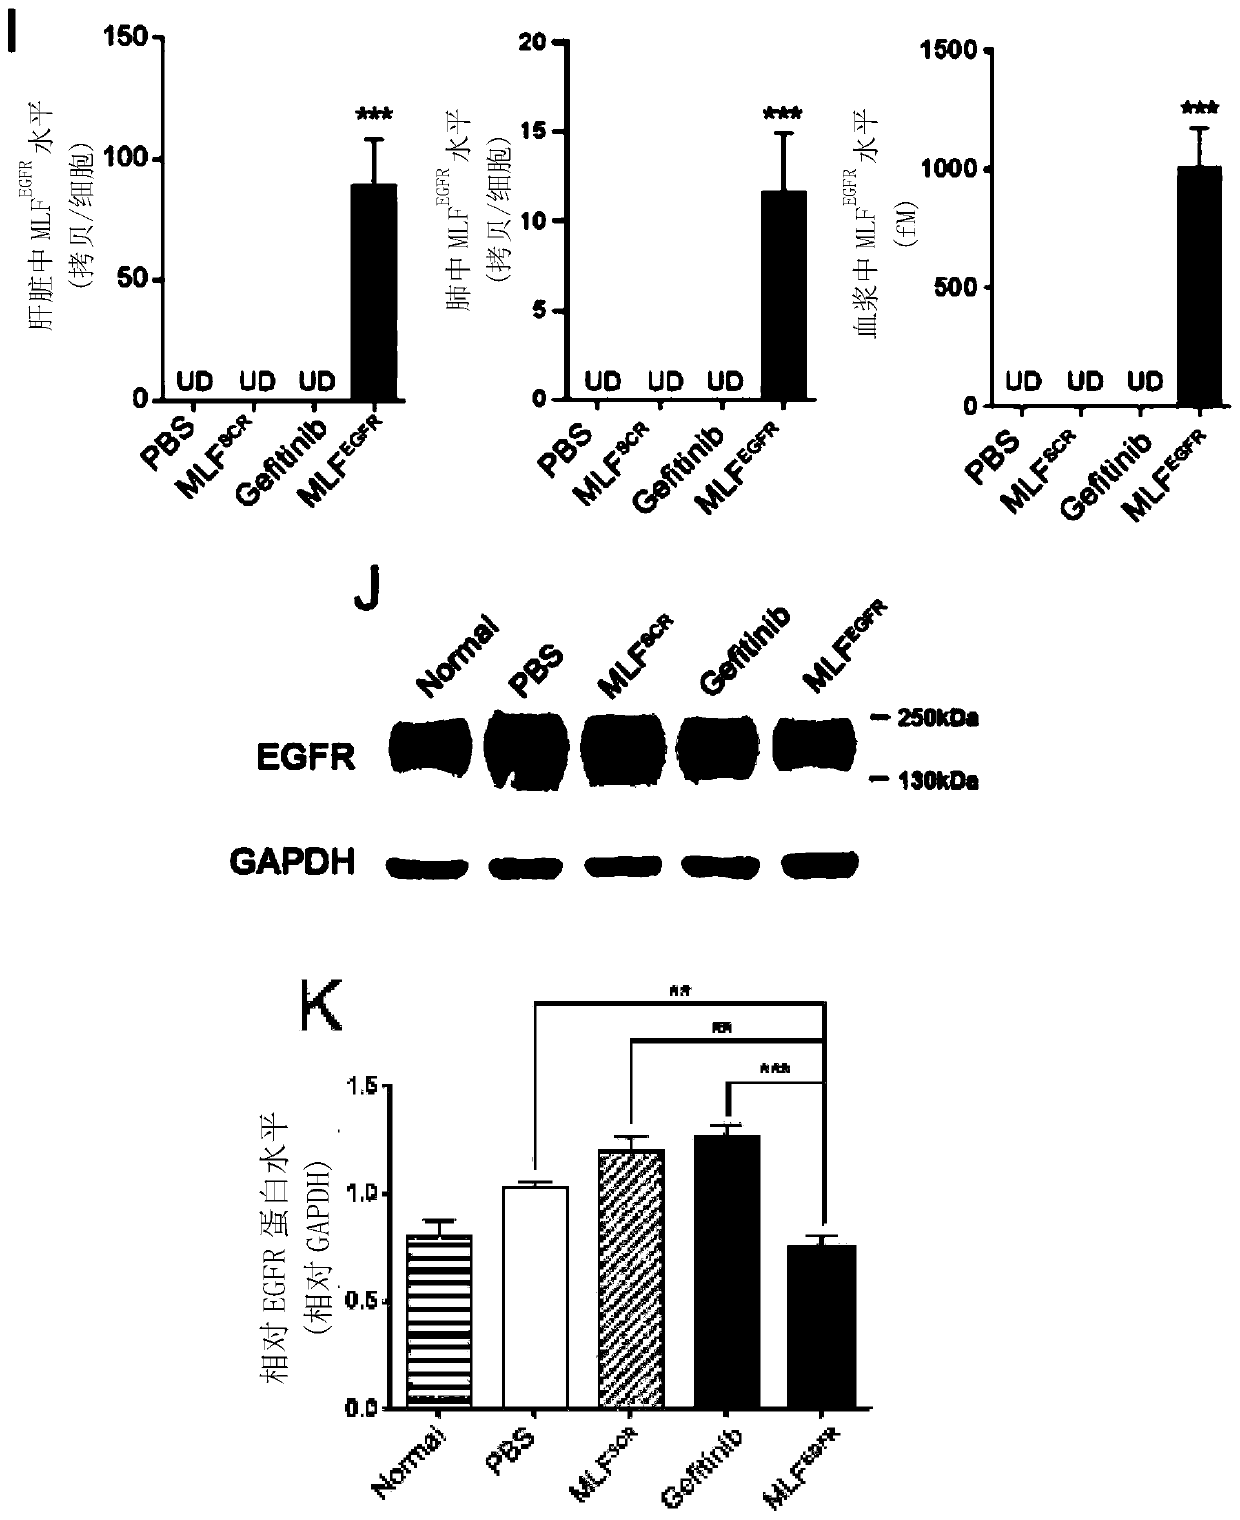 siRNA inhibiting EGFR expression as well as precursors and application of siRNA